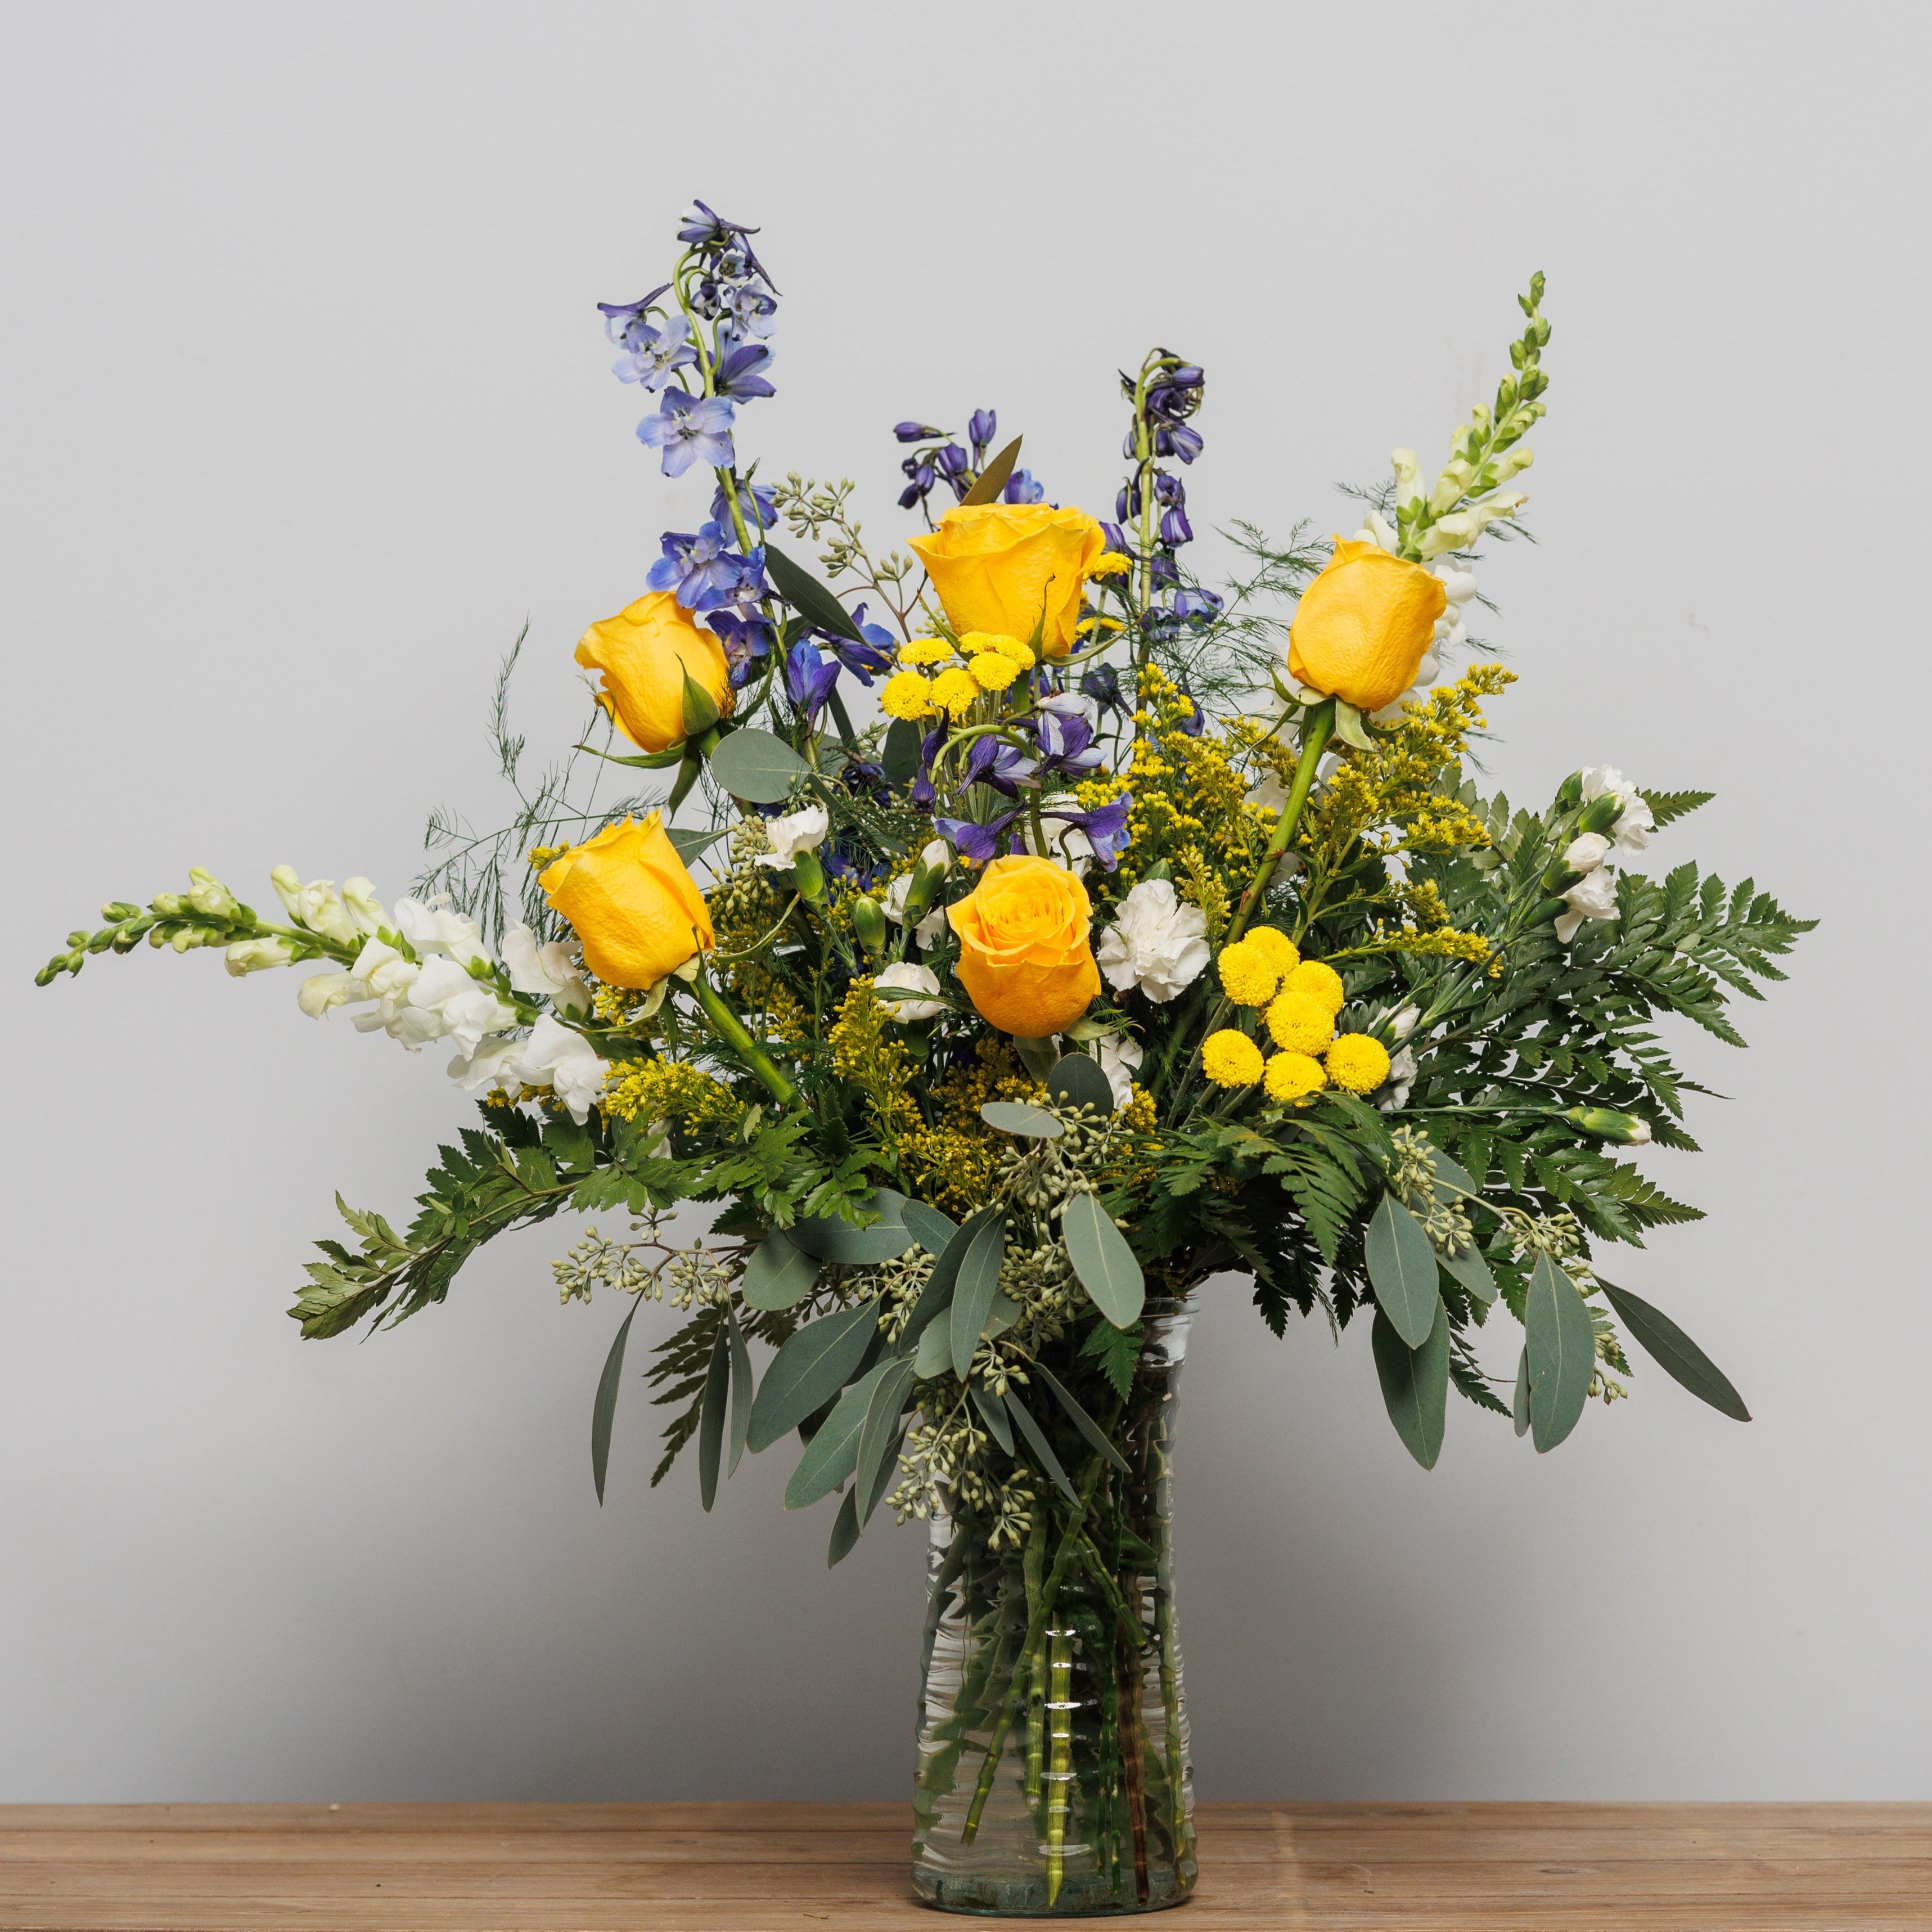 Yellow roses, blue delphinium and white snap dragons in a vase arrangement